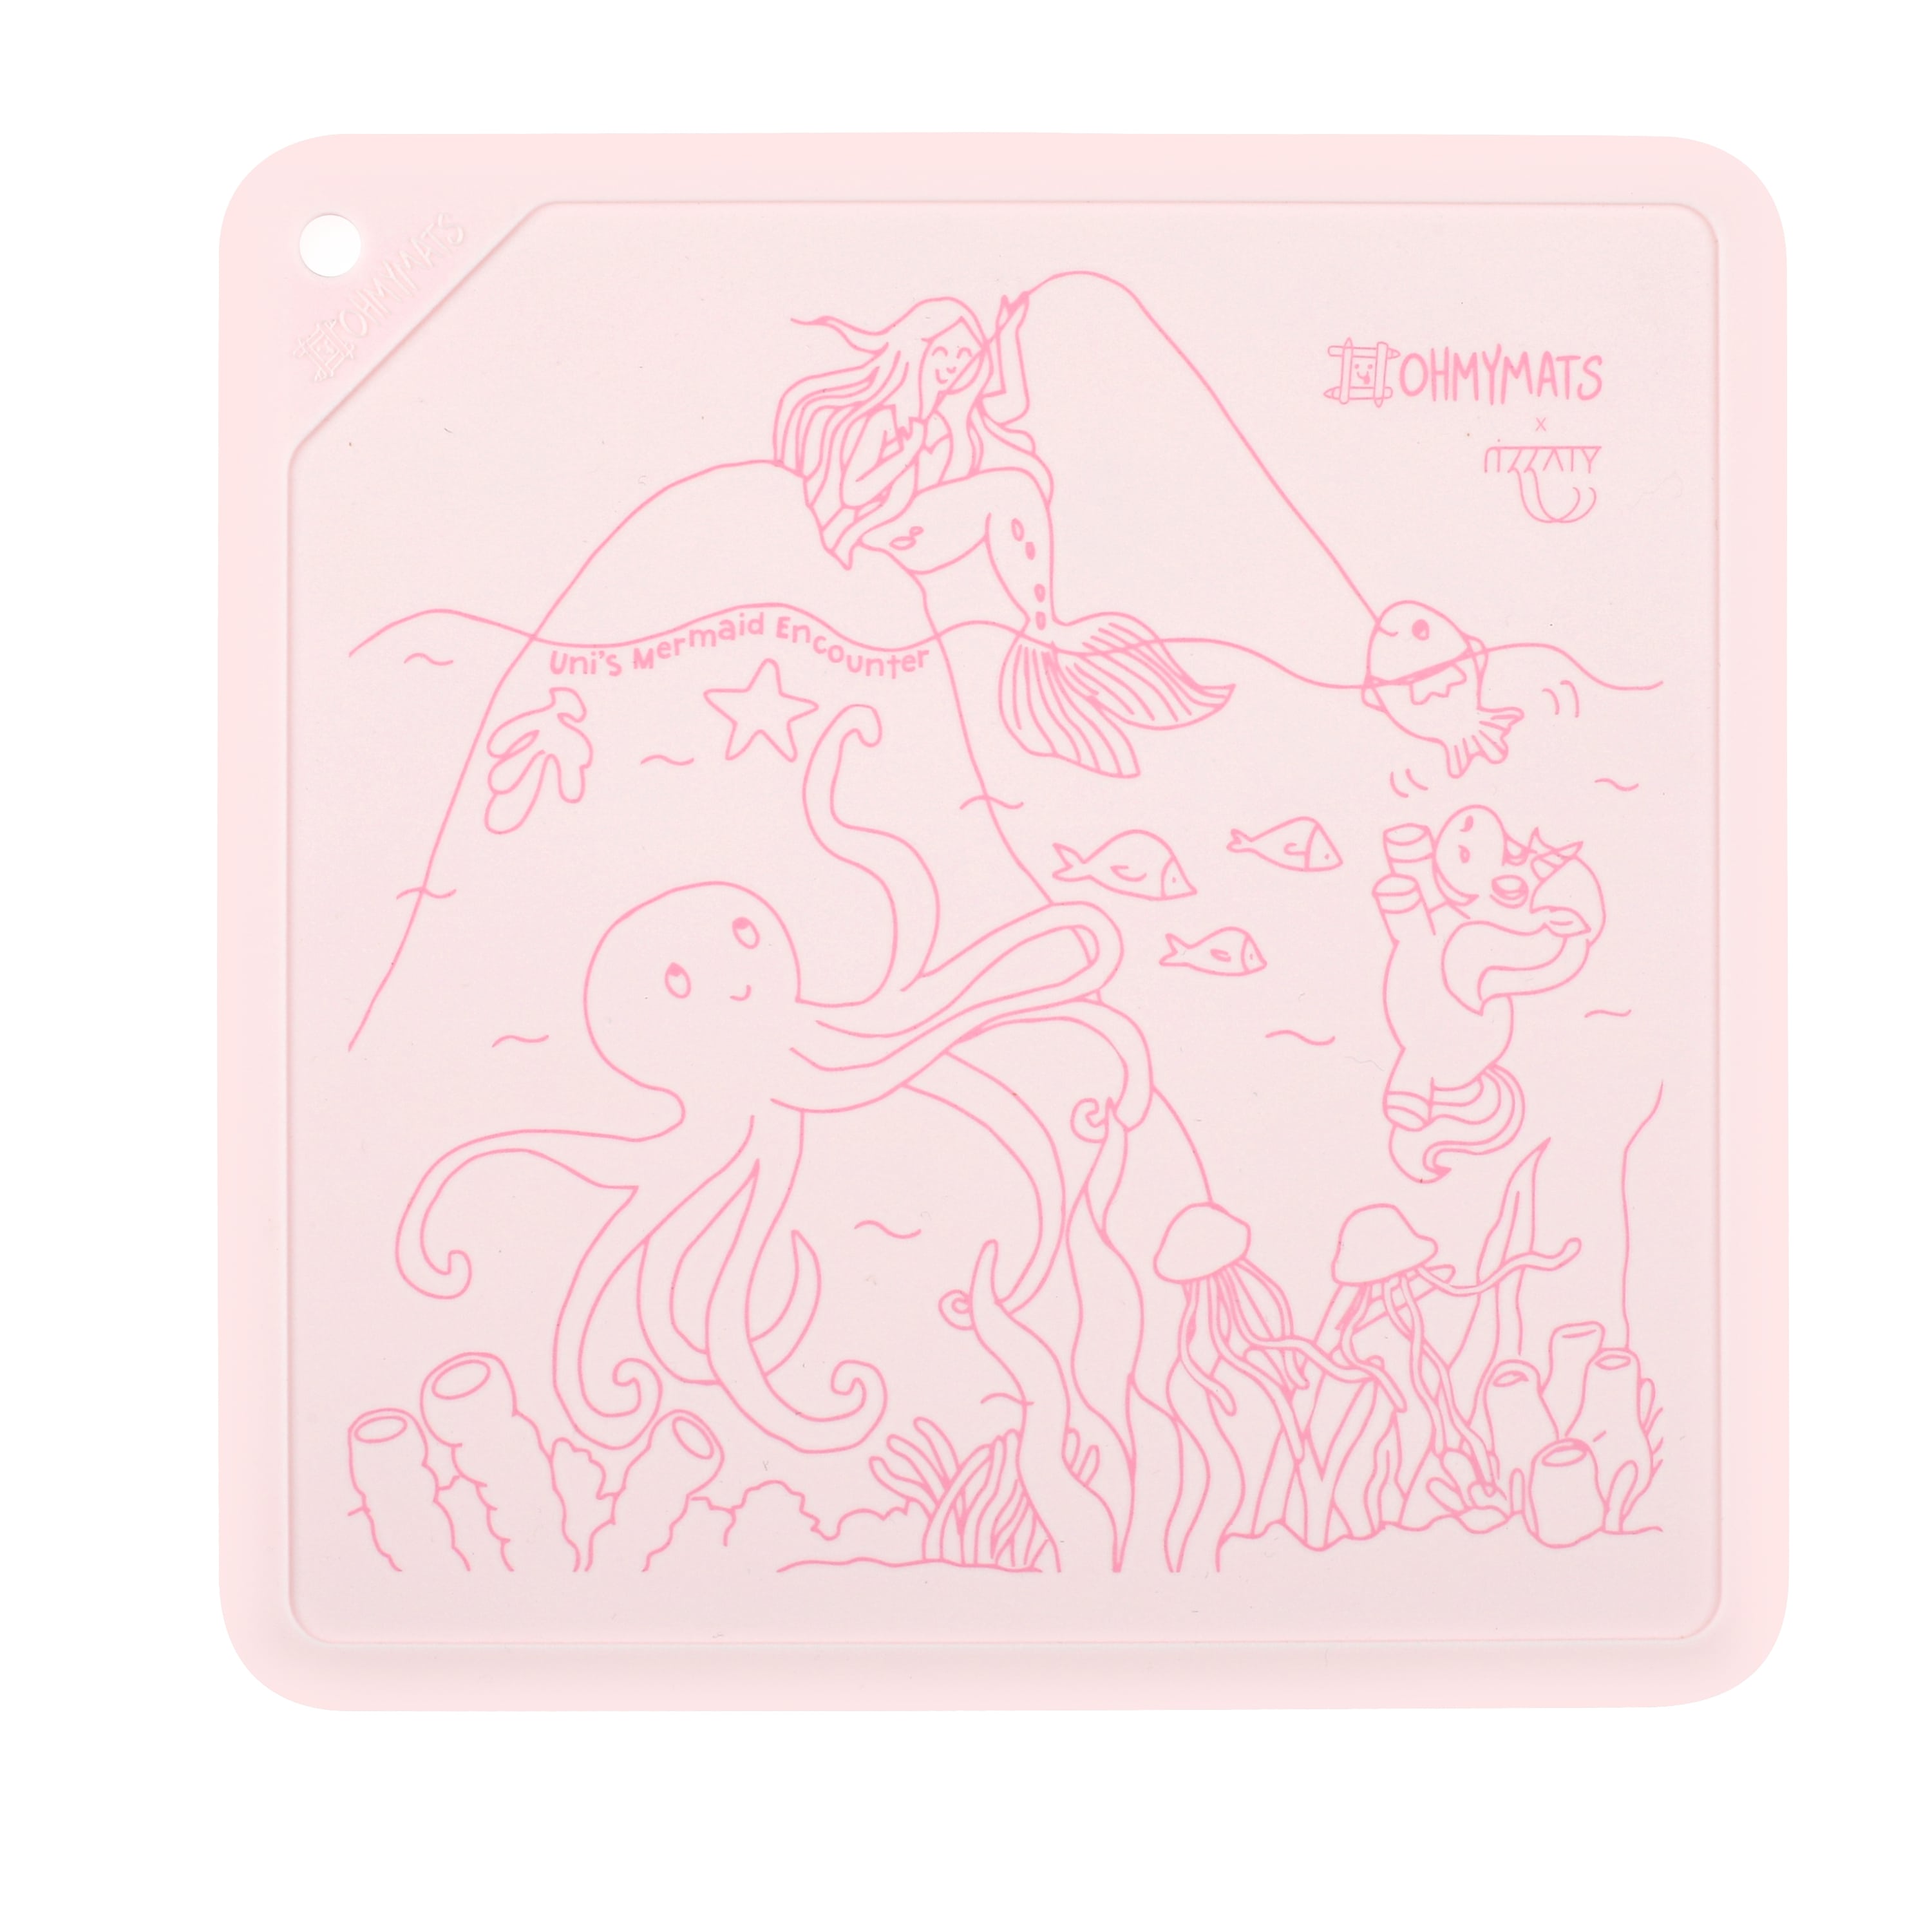 #ohmymats Square Mats - The Pink Series - Uni	's Mermaid Encounter